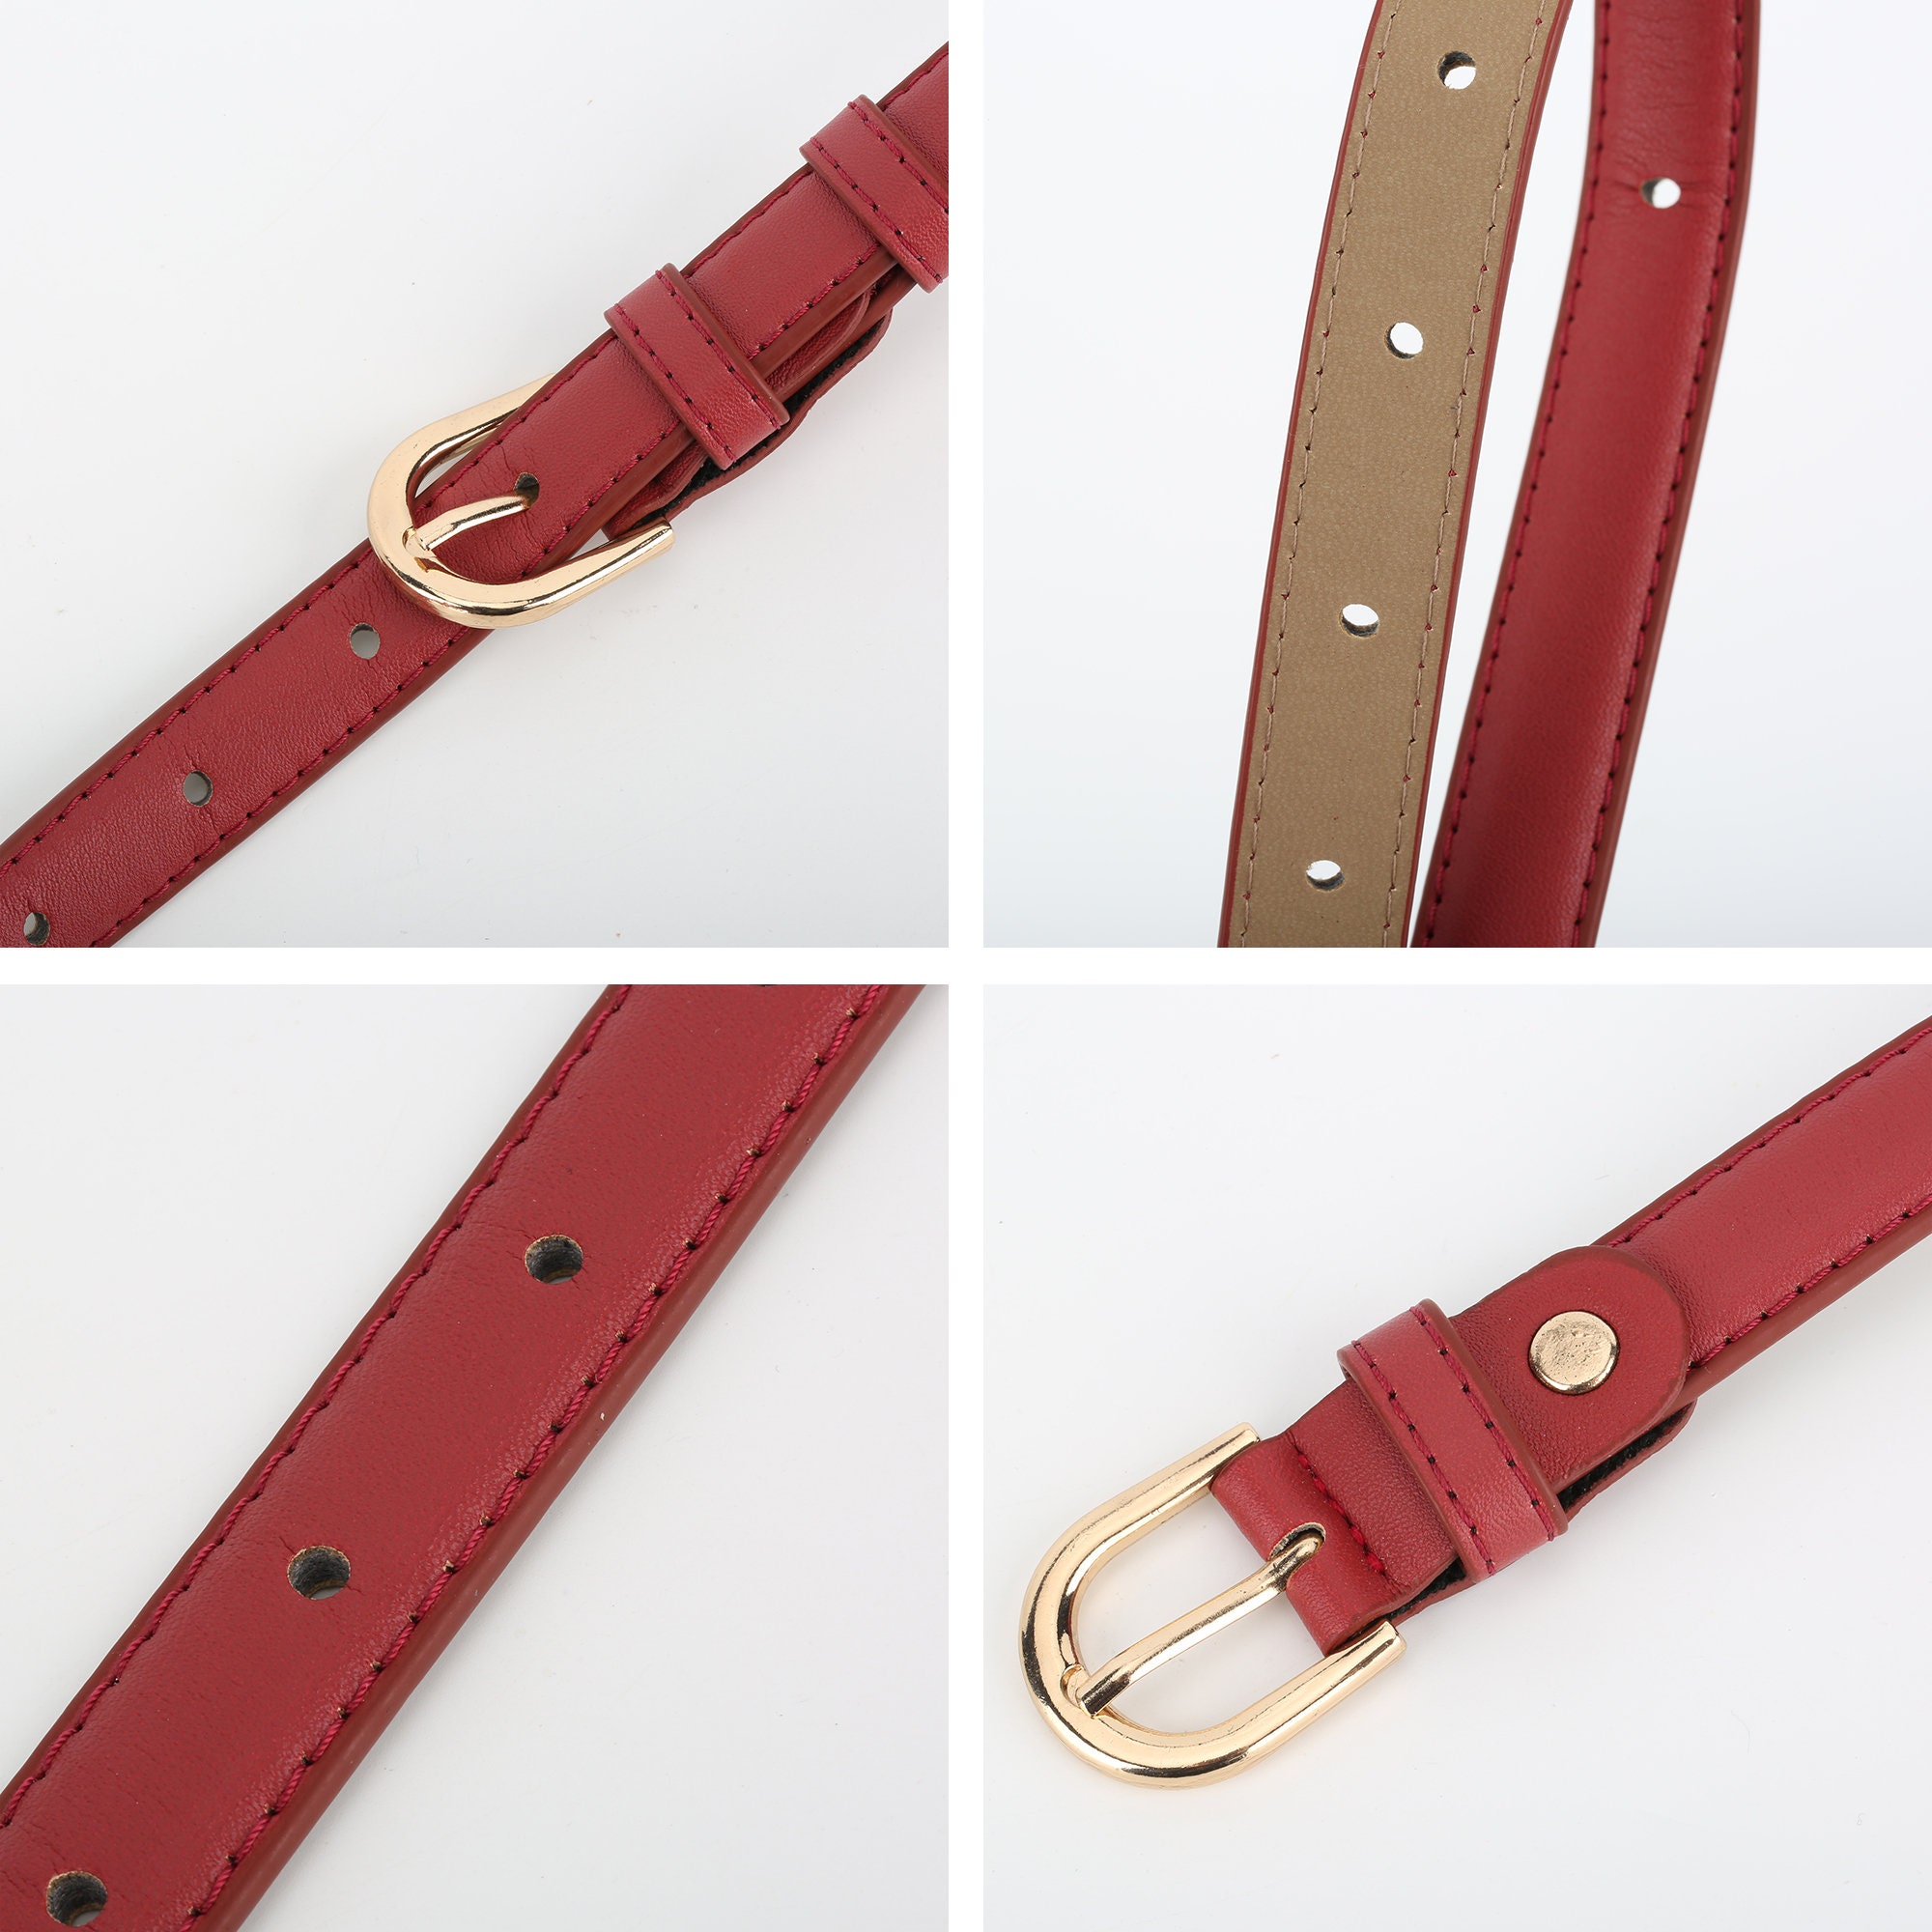 Women's 0.98 Inch Width Thin Leather Belt Fashion Designer Belts for Jeans  Pants Dresses with Gold BuckleCallanCity - Personalized Luxury GIFT,Phone  Accessories,Watch Accessories